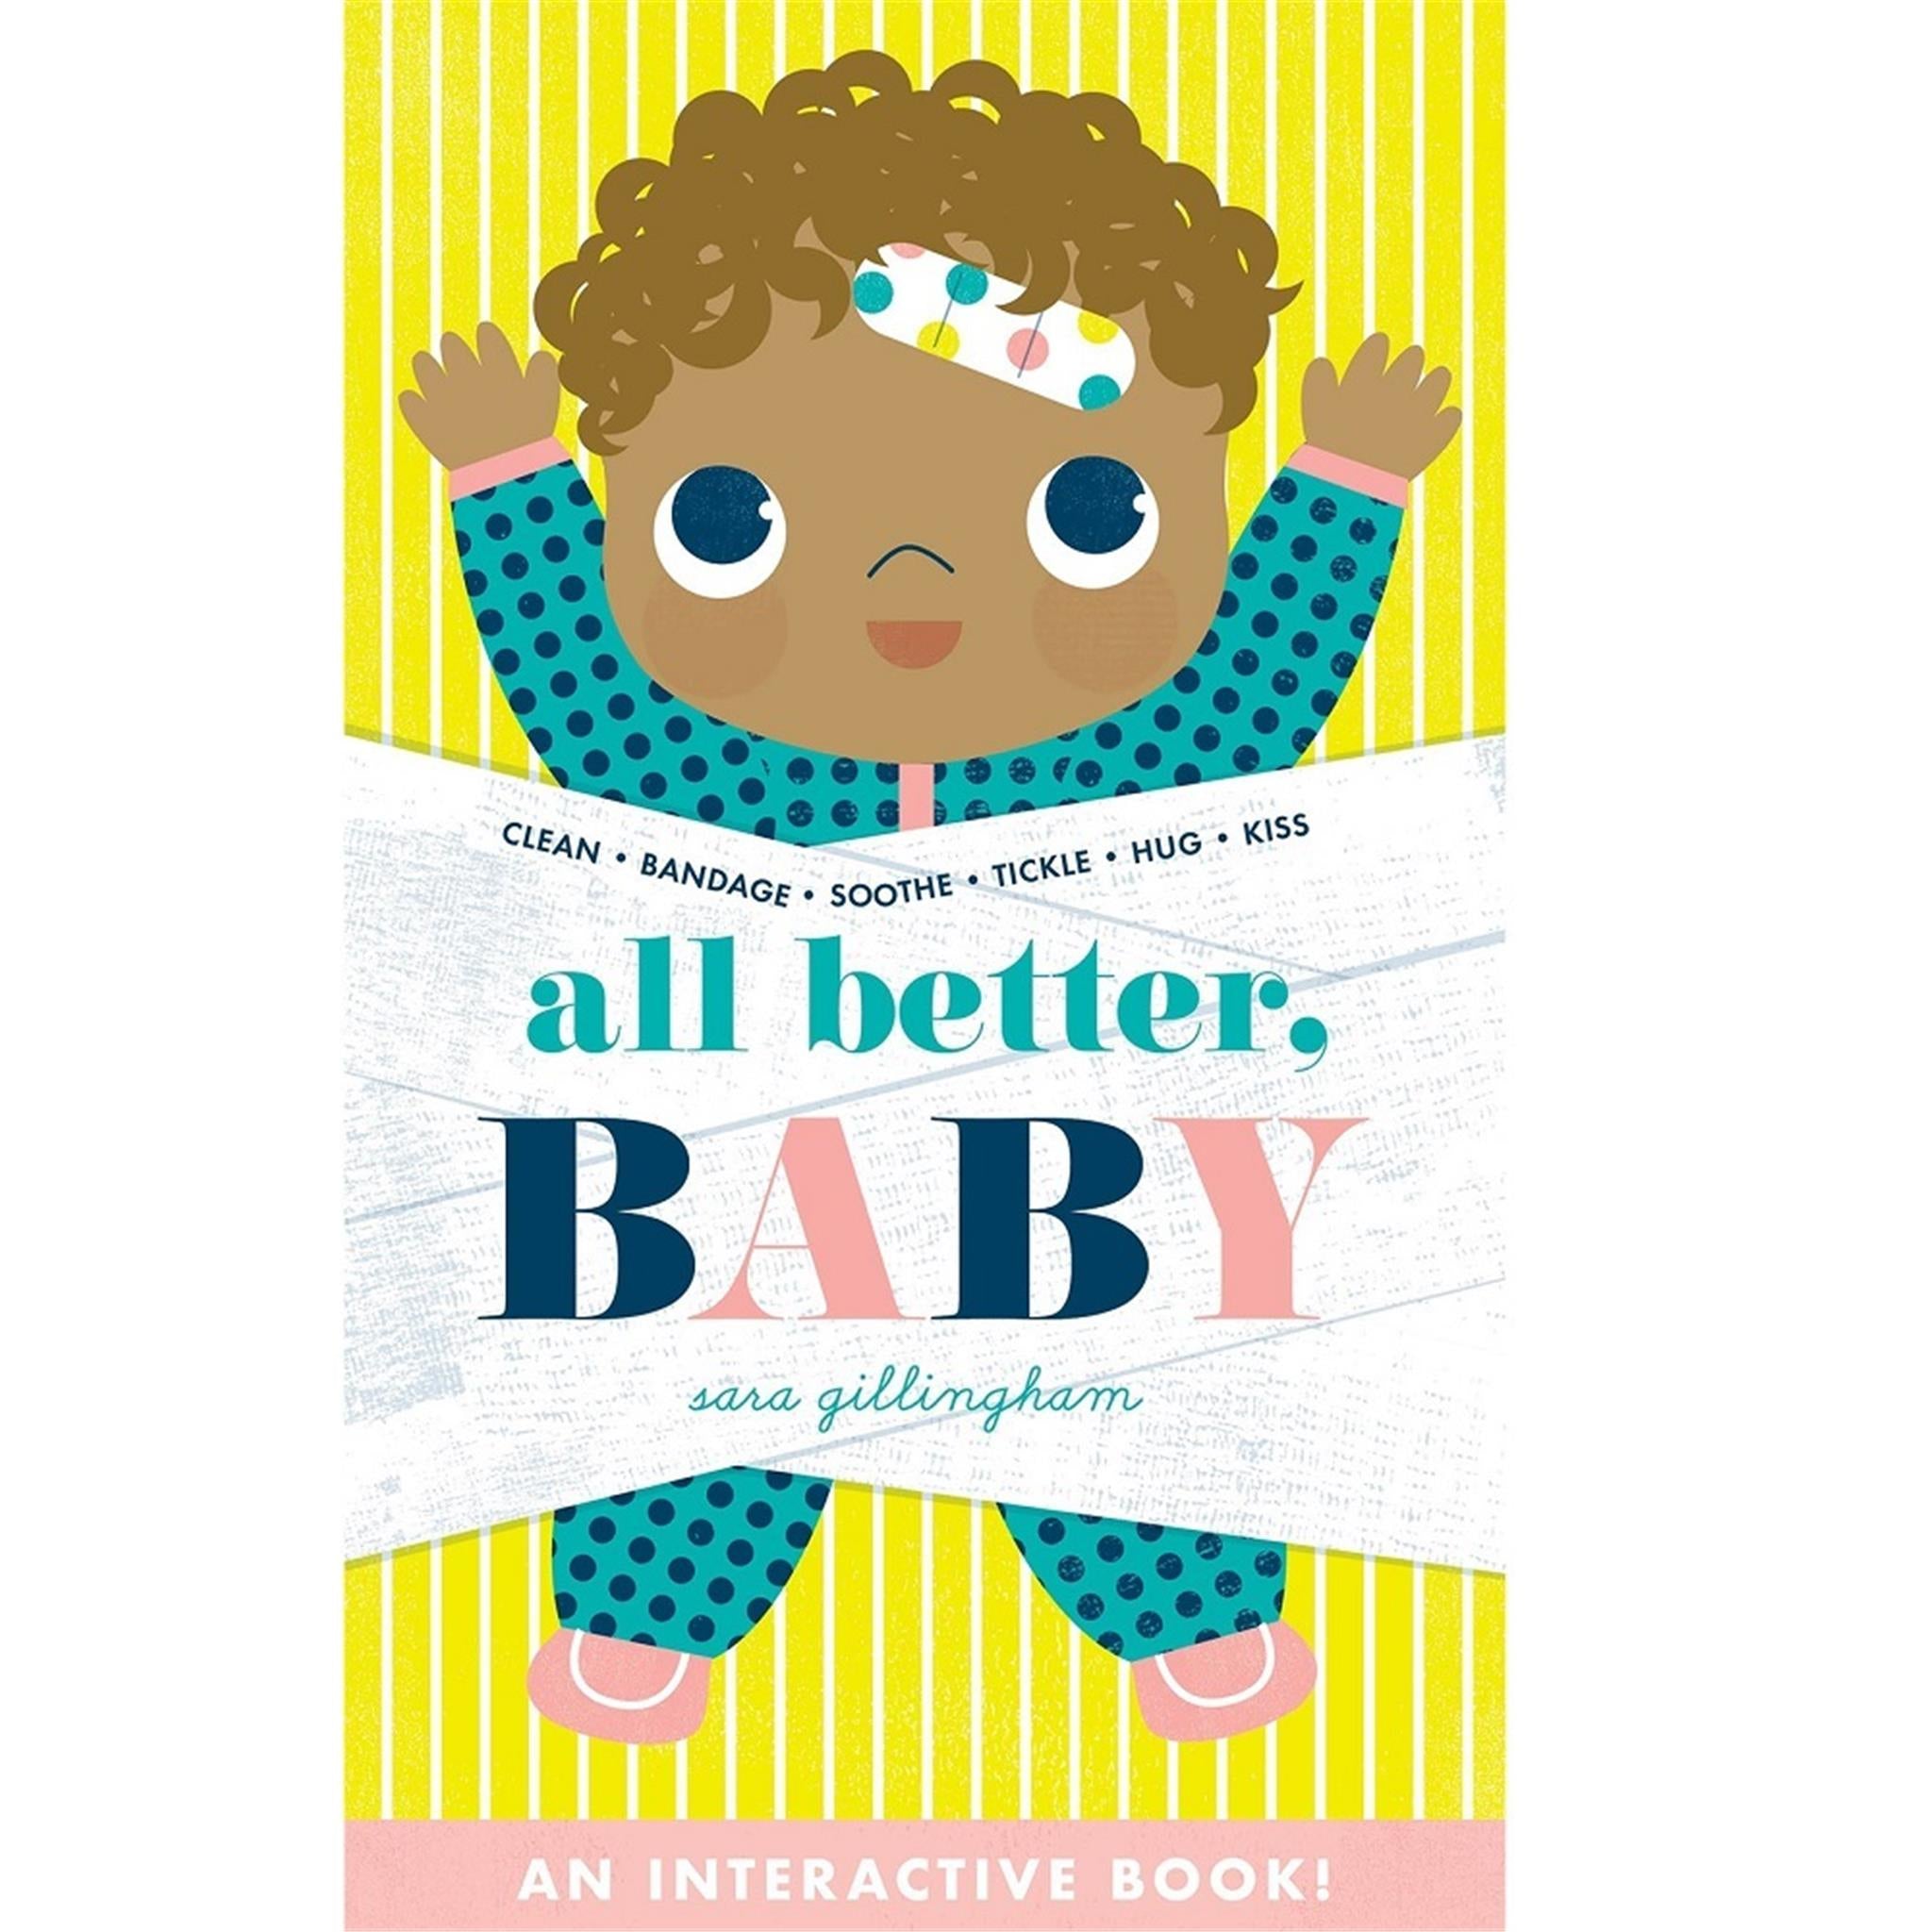 All Better Baby Childrens Book